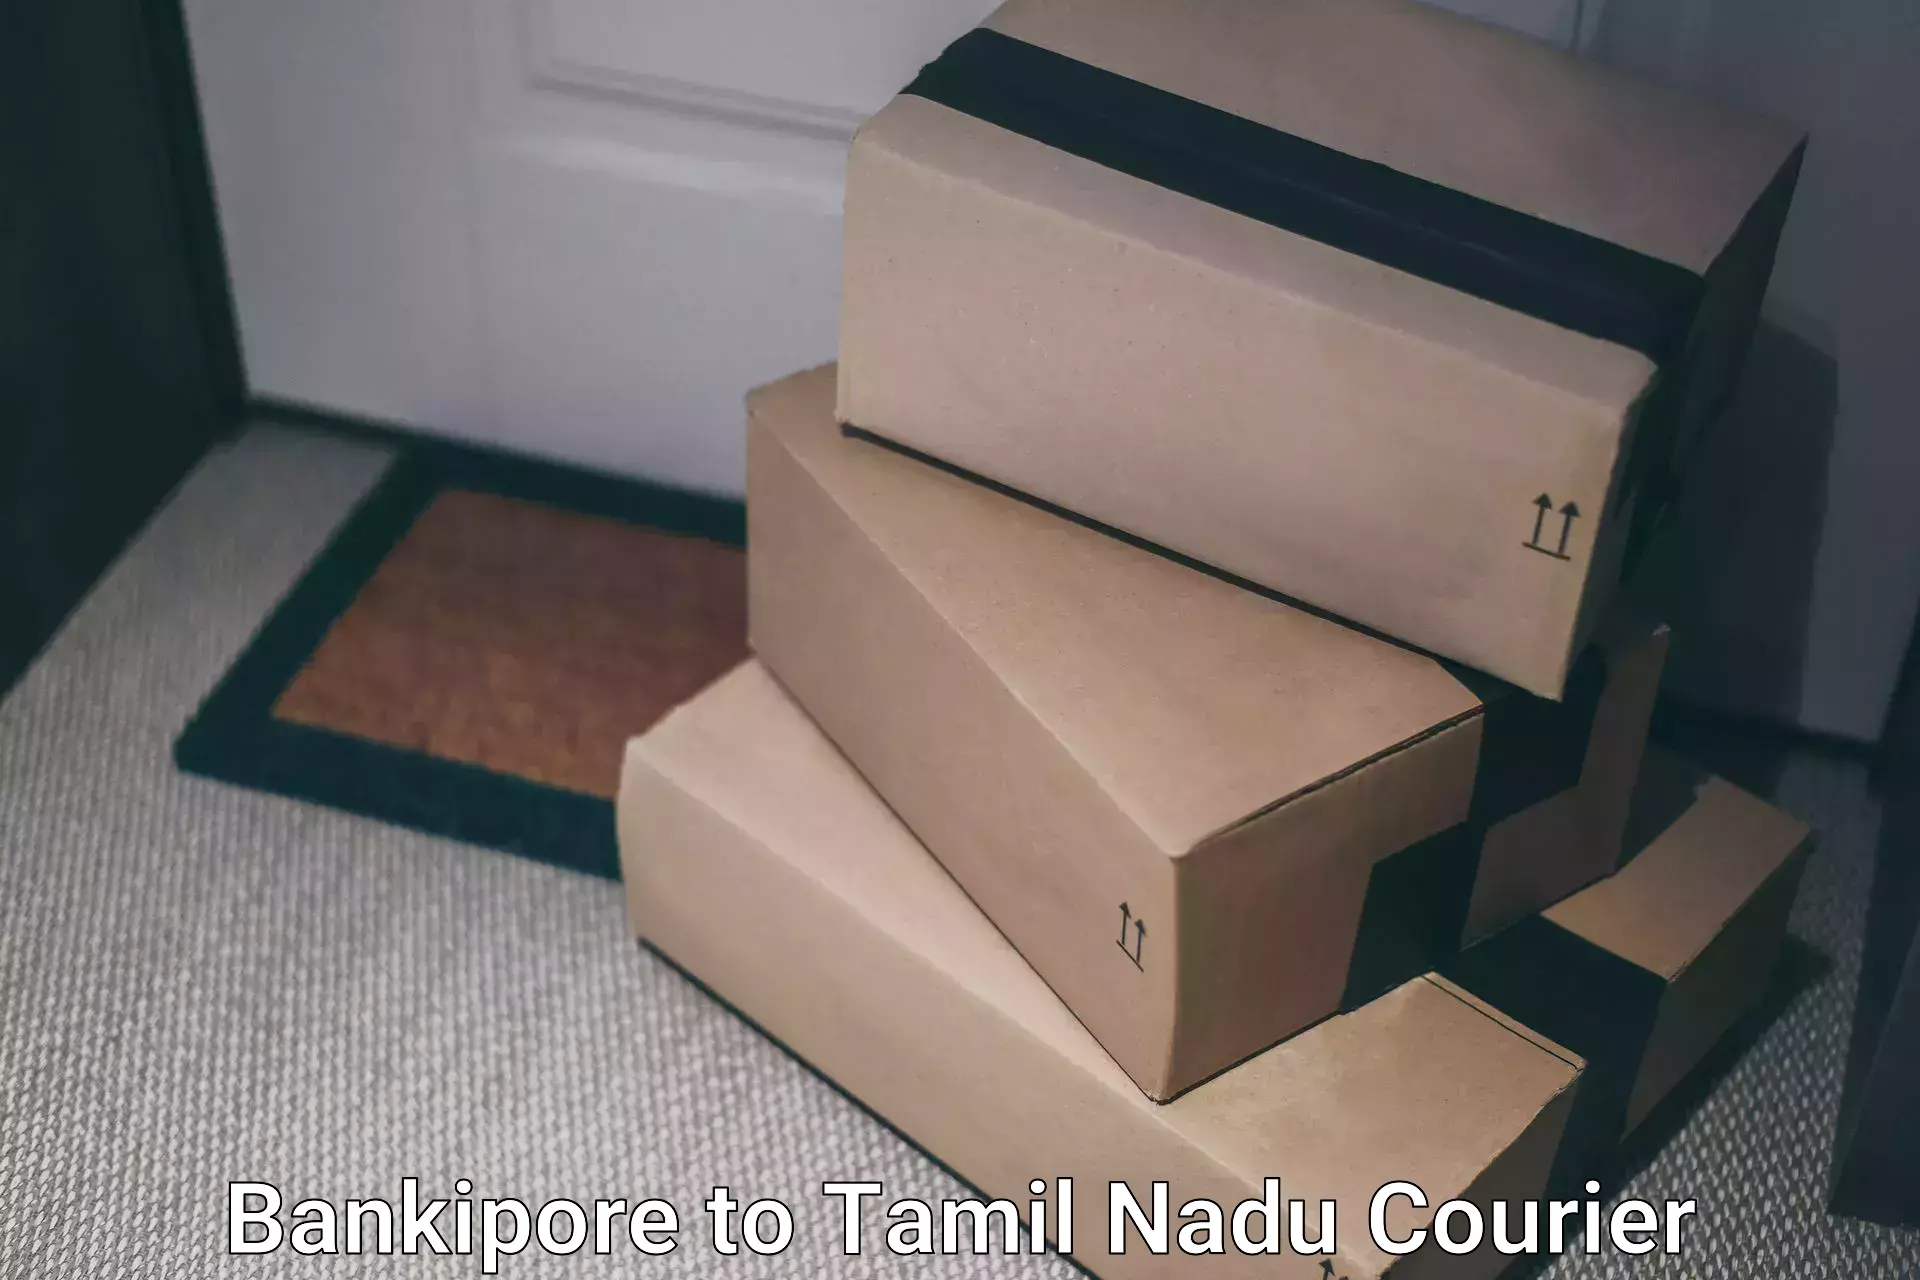 Expedited parcel delivery in Bankipore to Trichy